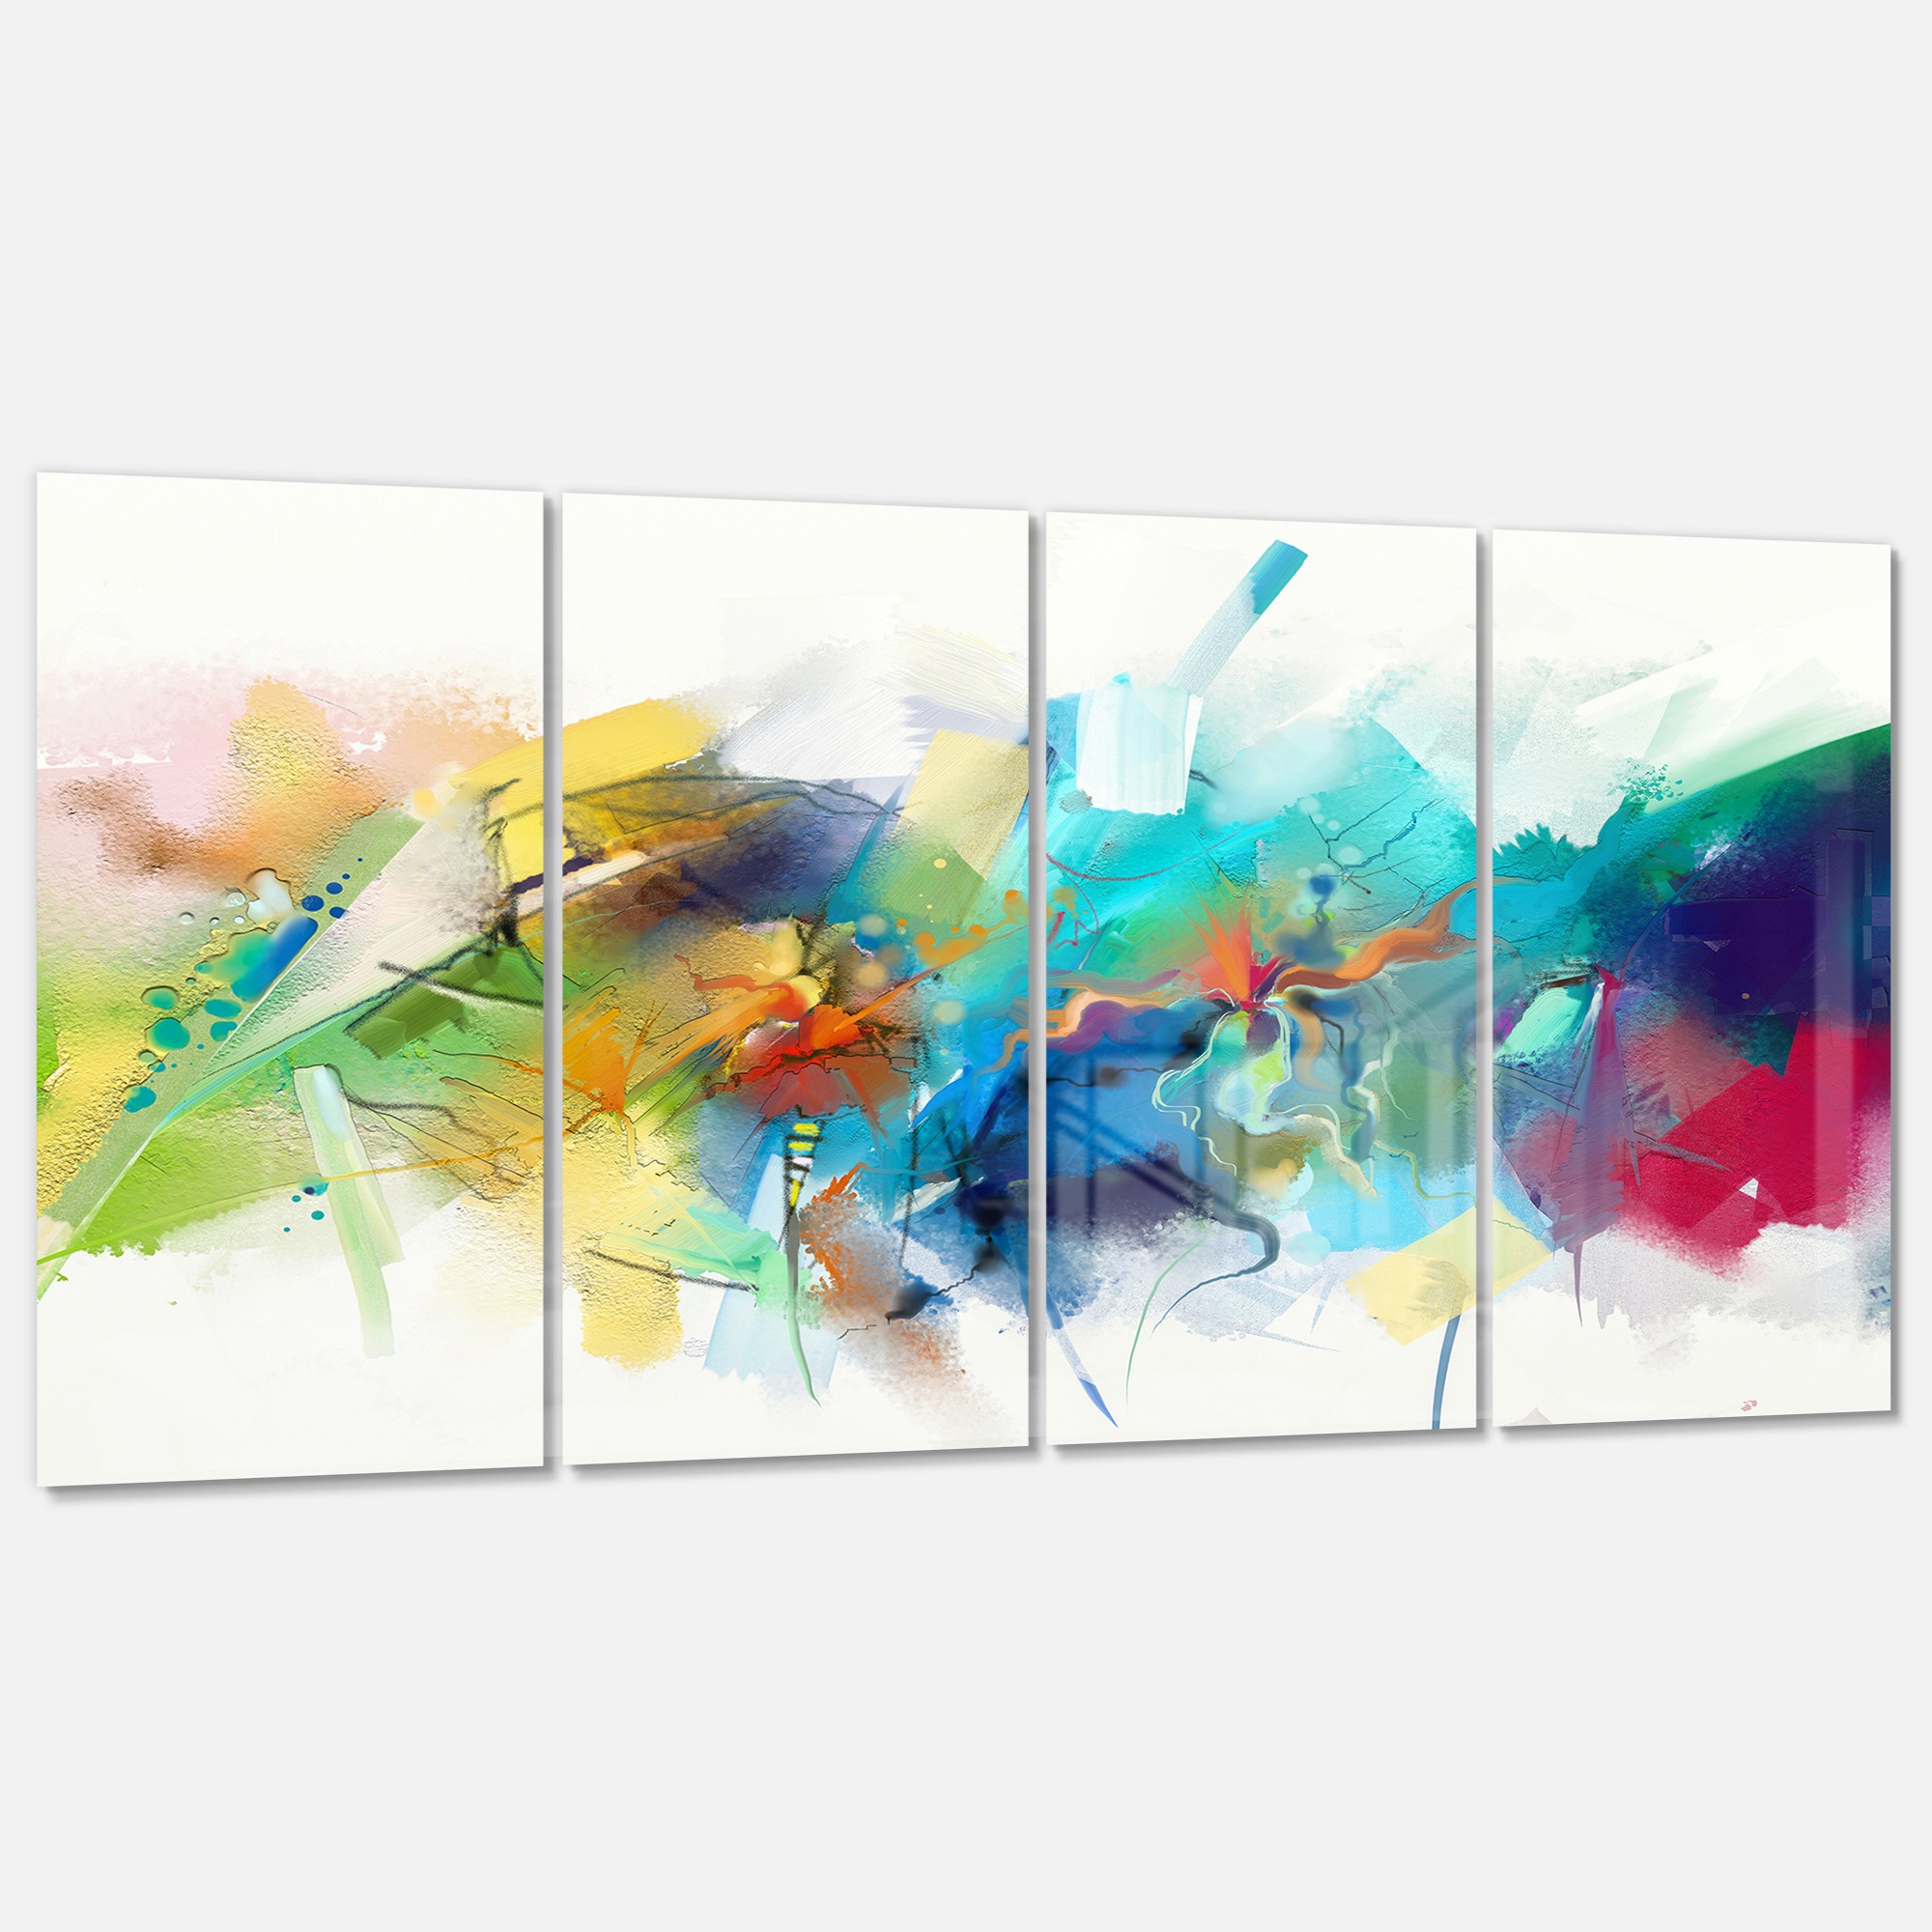 DESIGN ART Brush Stroke Colorful Oil Painting - Contemporary Painting Print on Wrapped Canvas set - 48x28 - 4 Panels